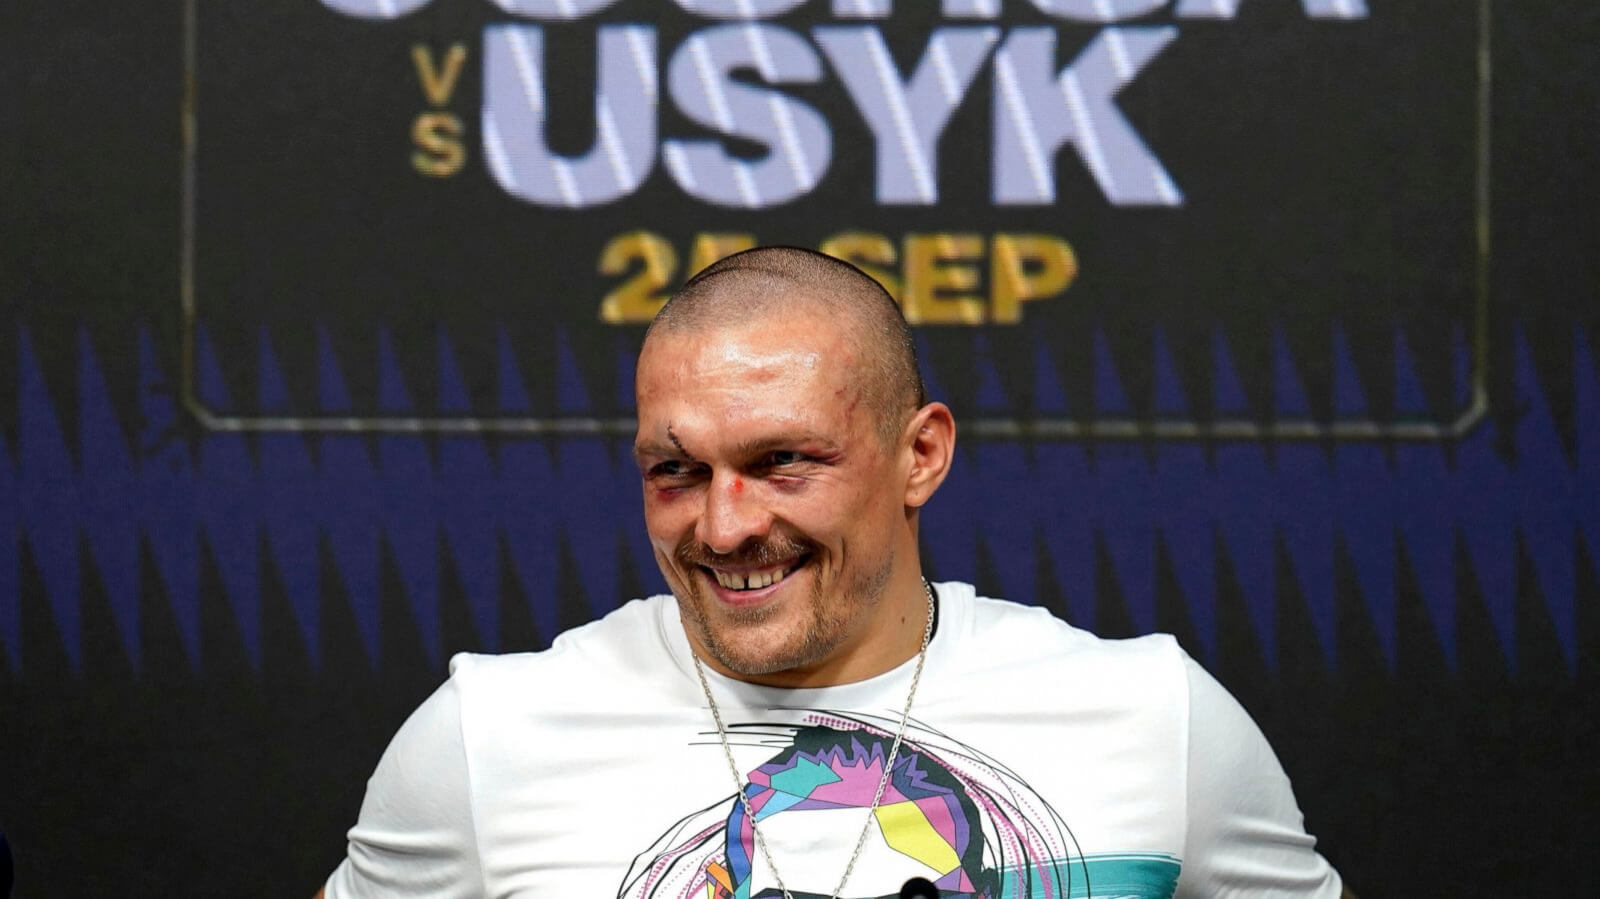 Usyk Promoter on Tyson Fury: He is the Next Opponent For Usyk